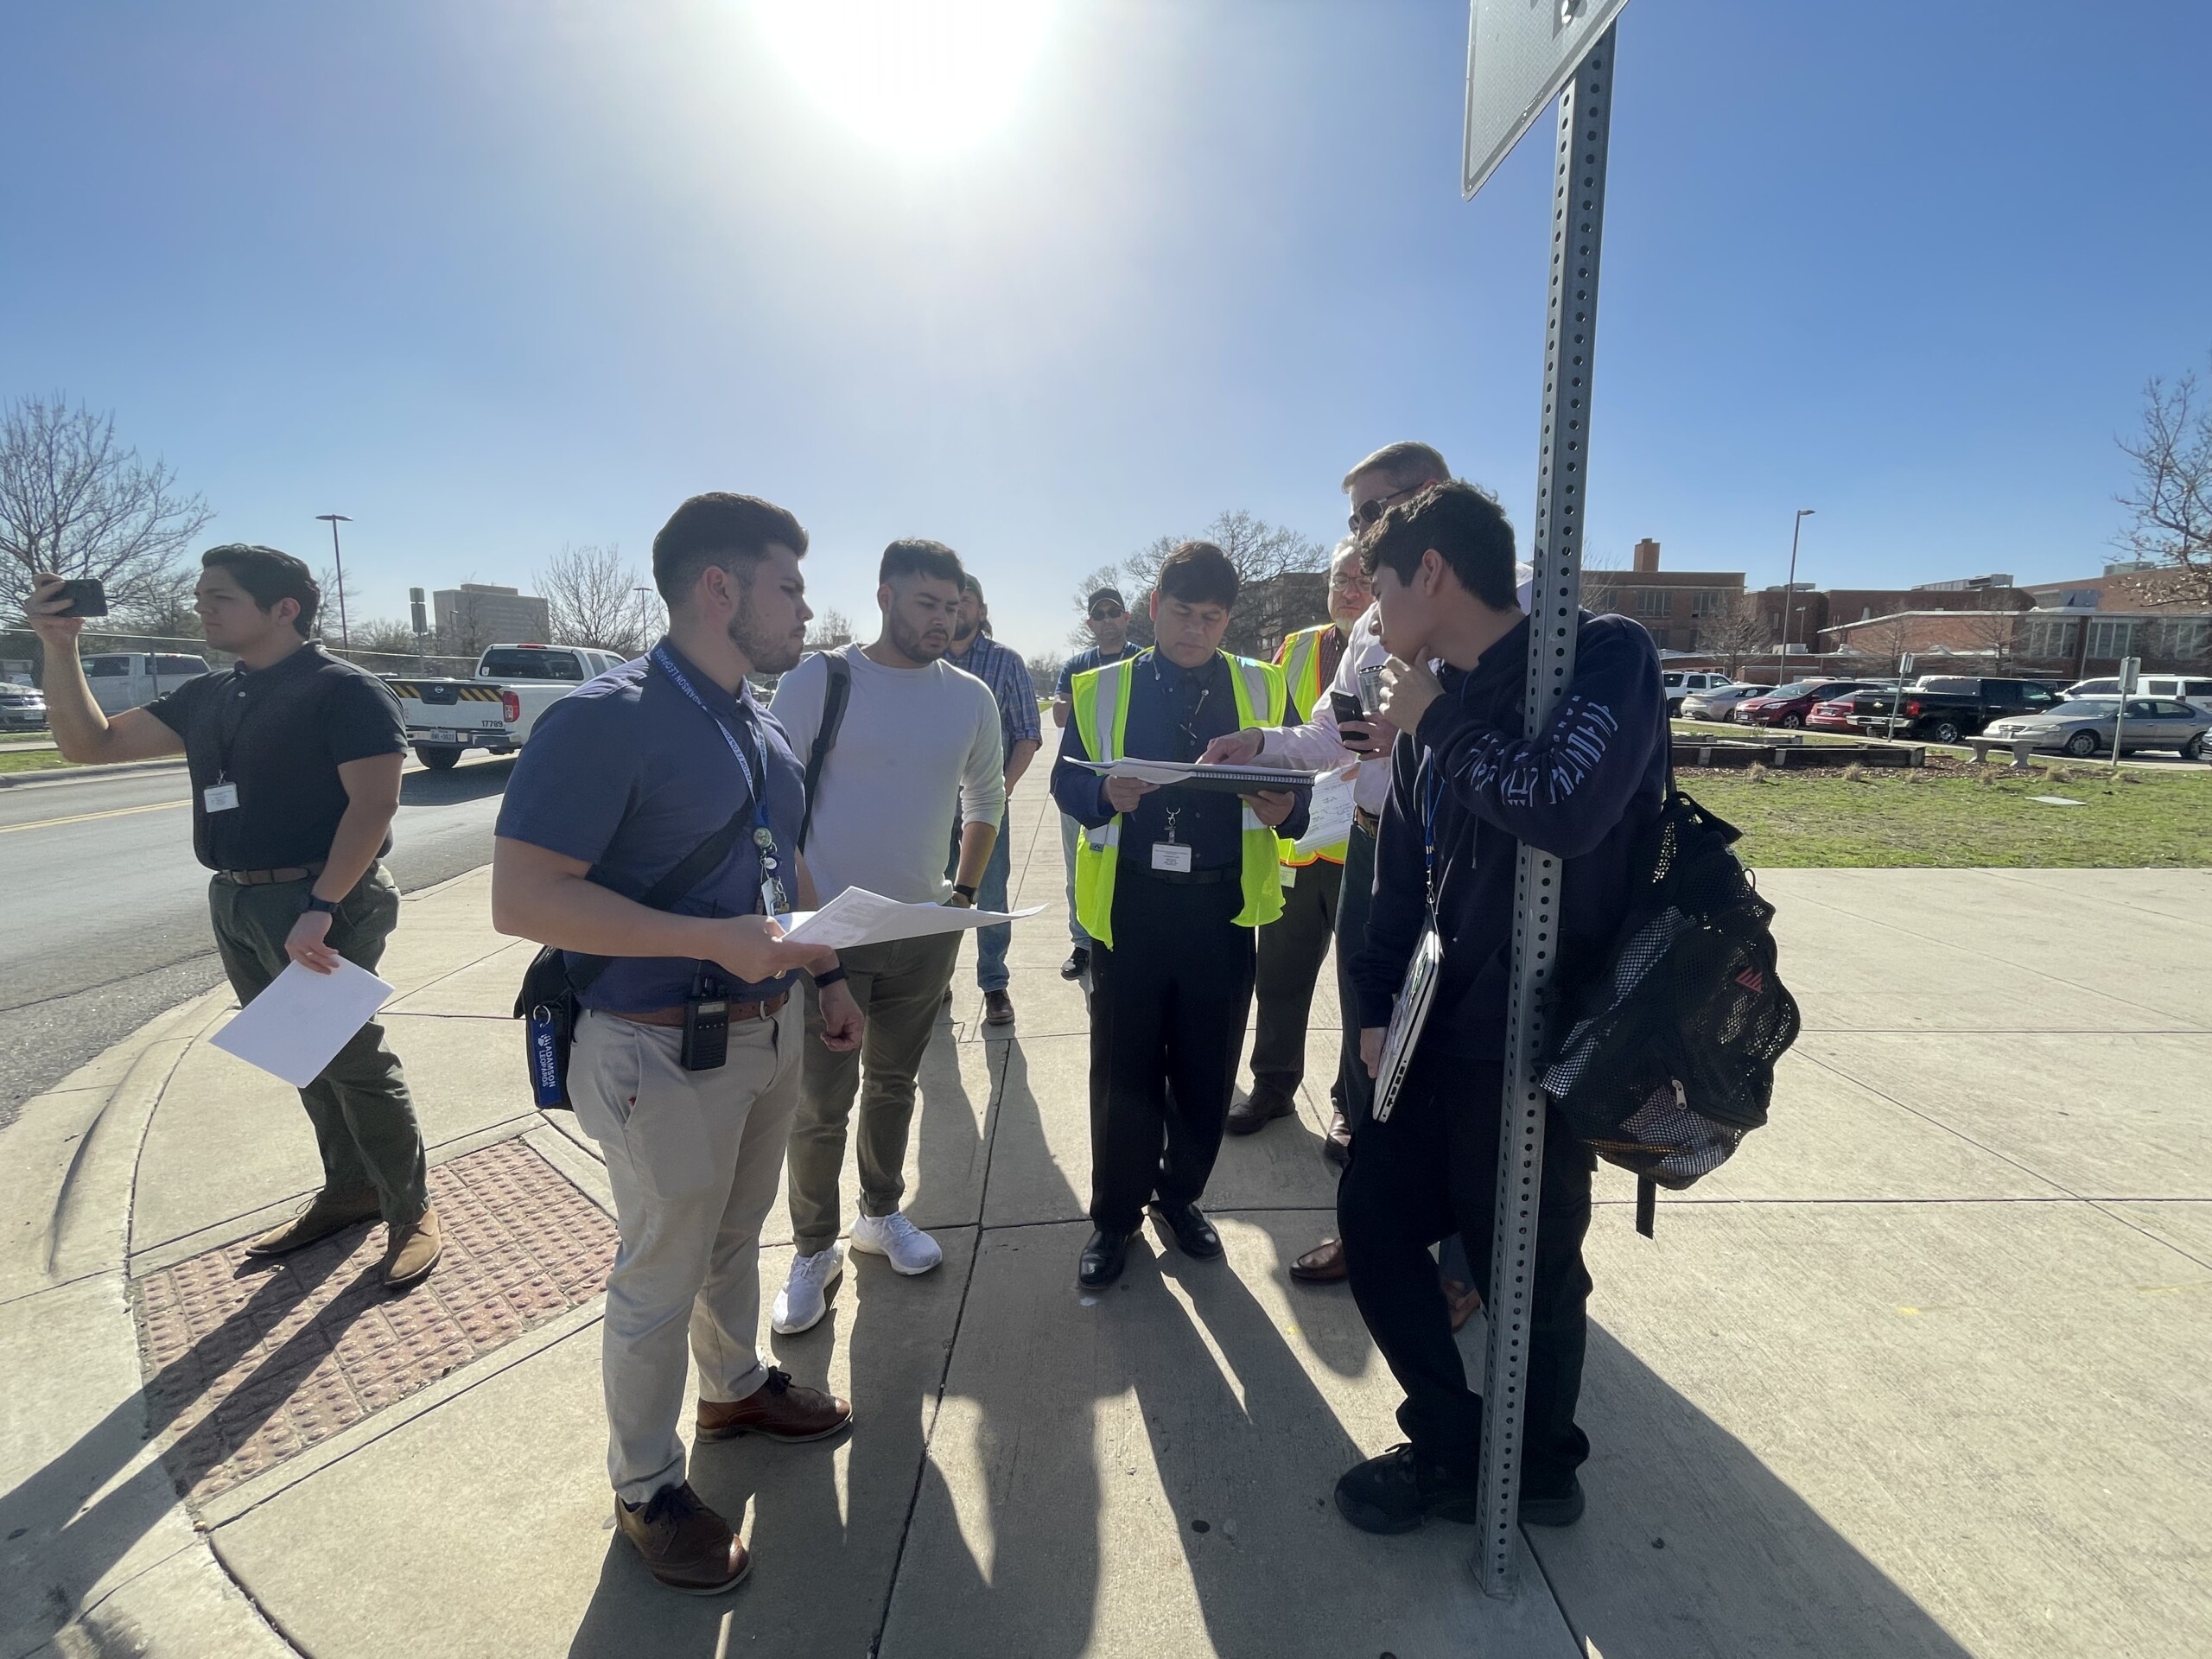 Sophomore who made Dallas pay attention to street safety near Adamson High